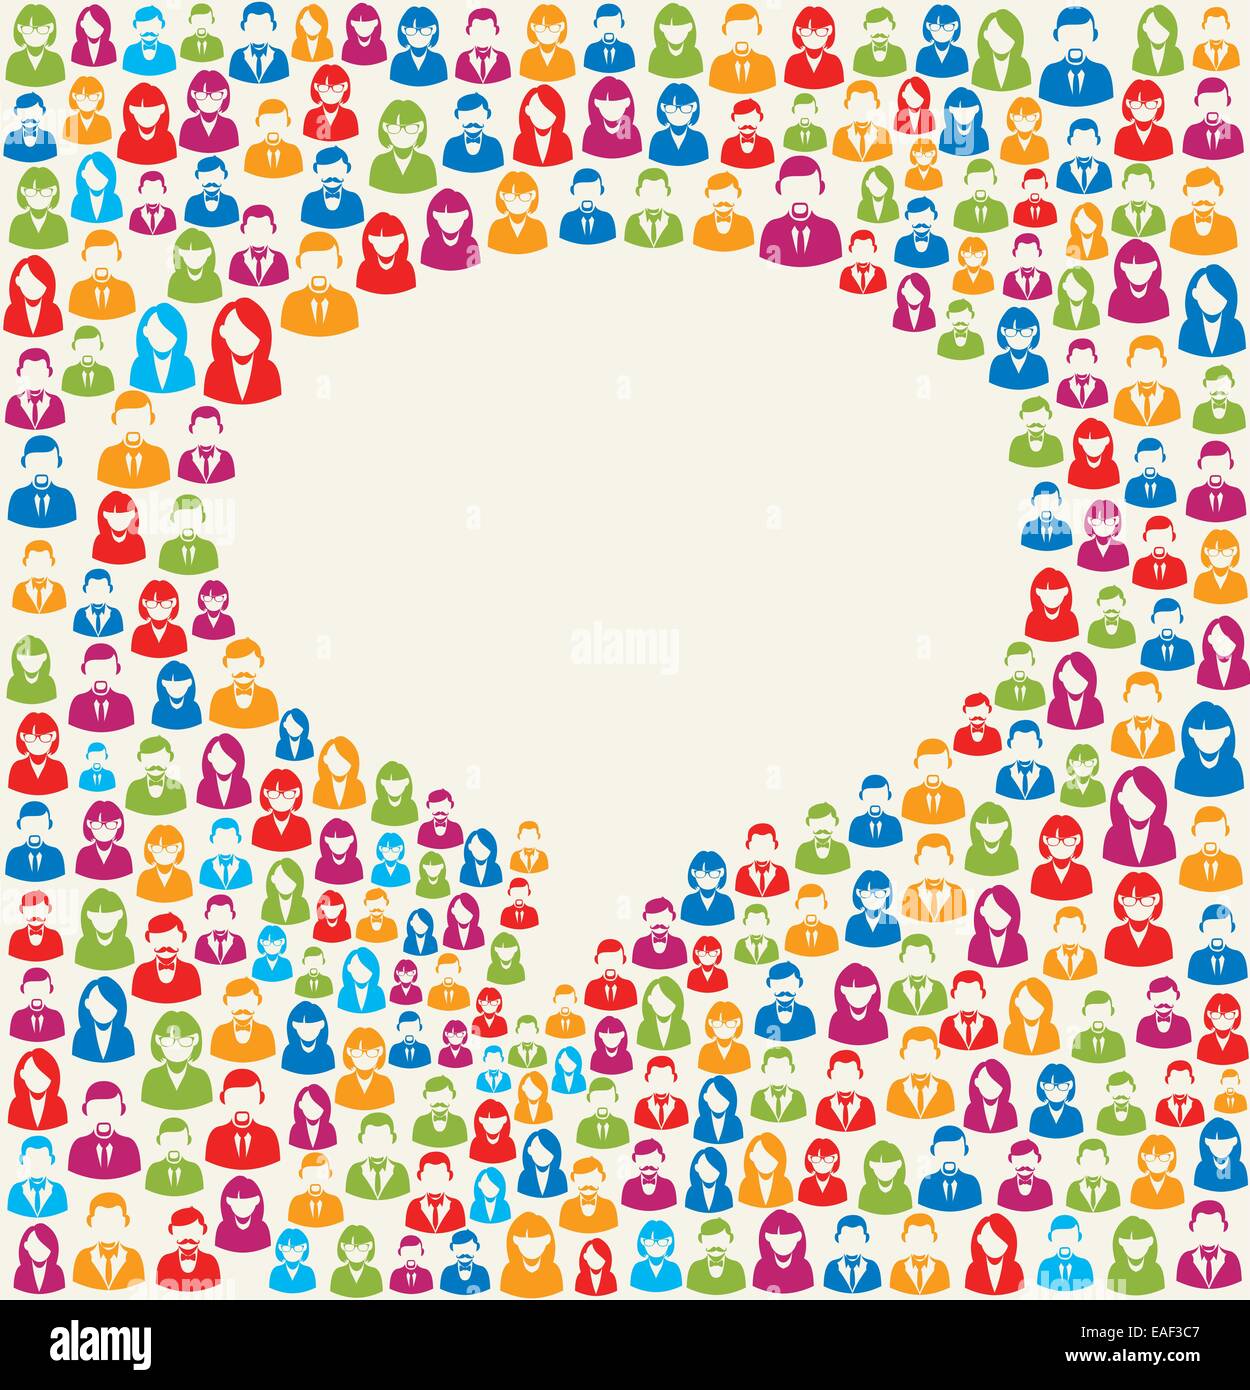 Colorful social media user icons texture in talk bubble shape composition background. EPS10 vector file with transparency layers Stock Photo